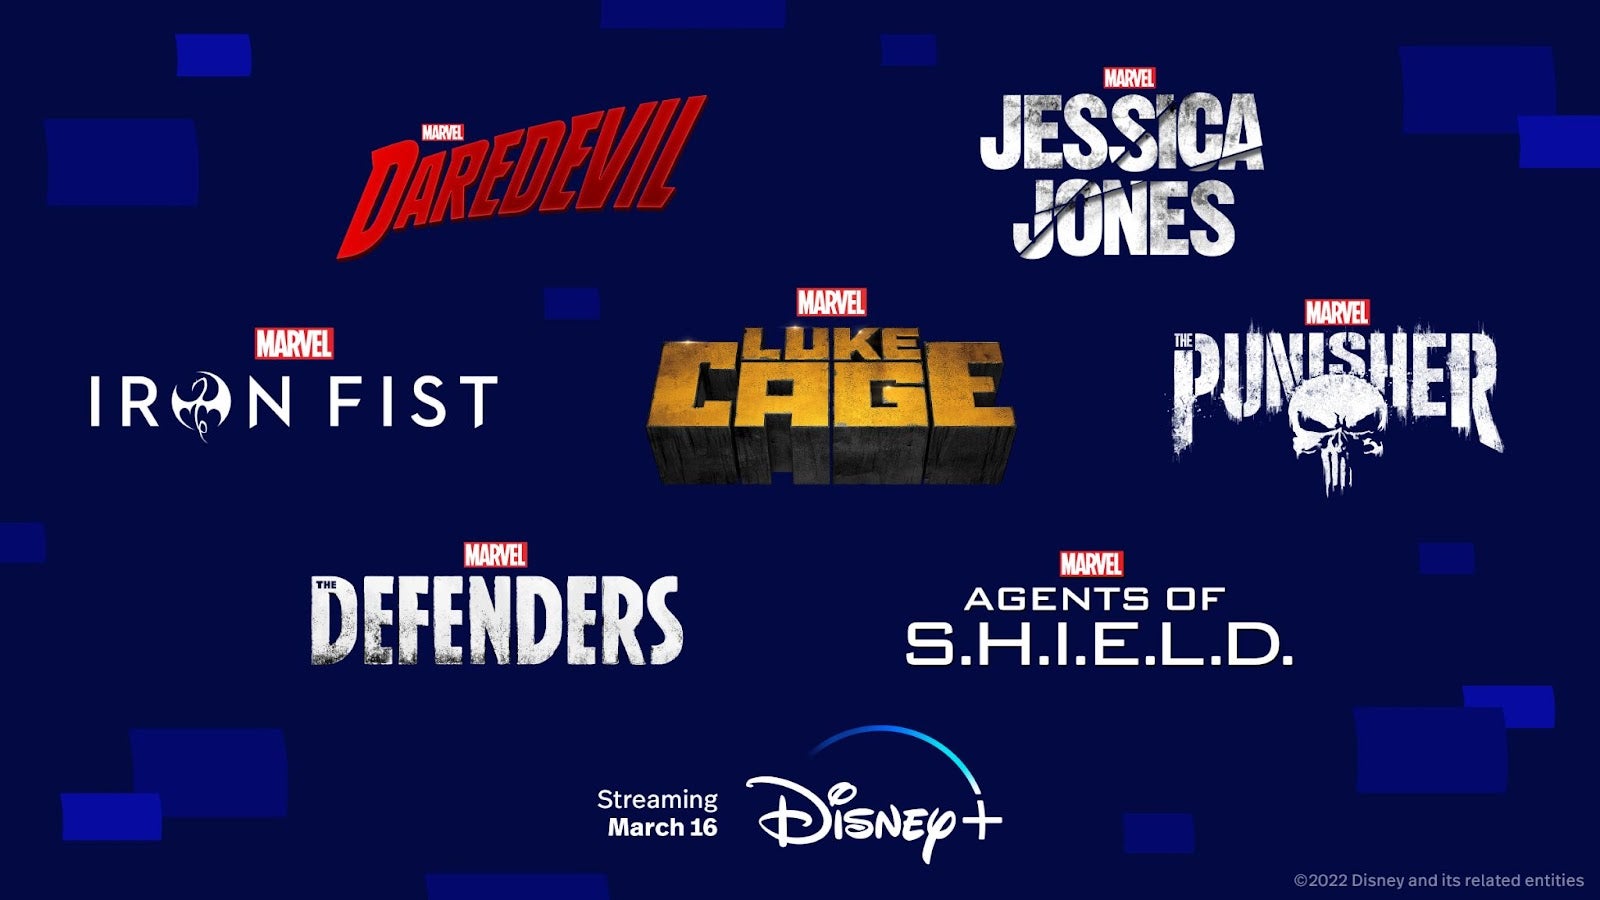 Update The Marvel Netflix series are now officially